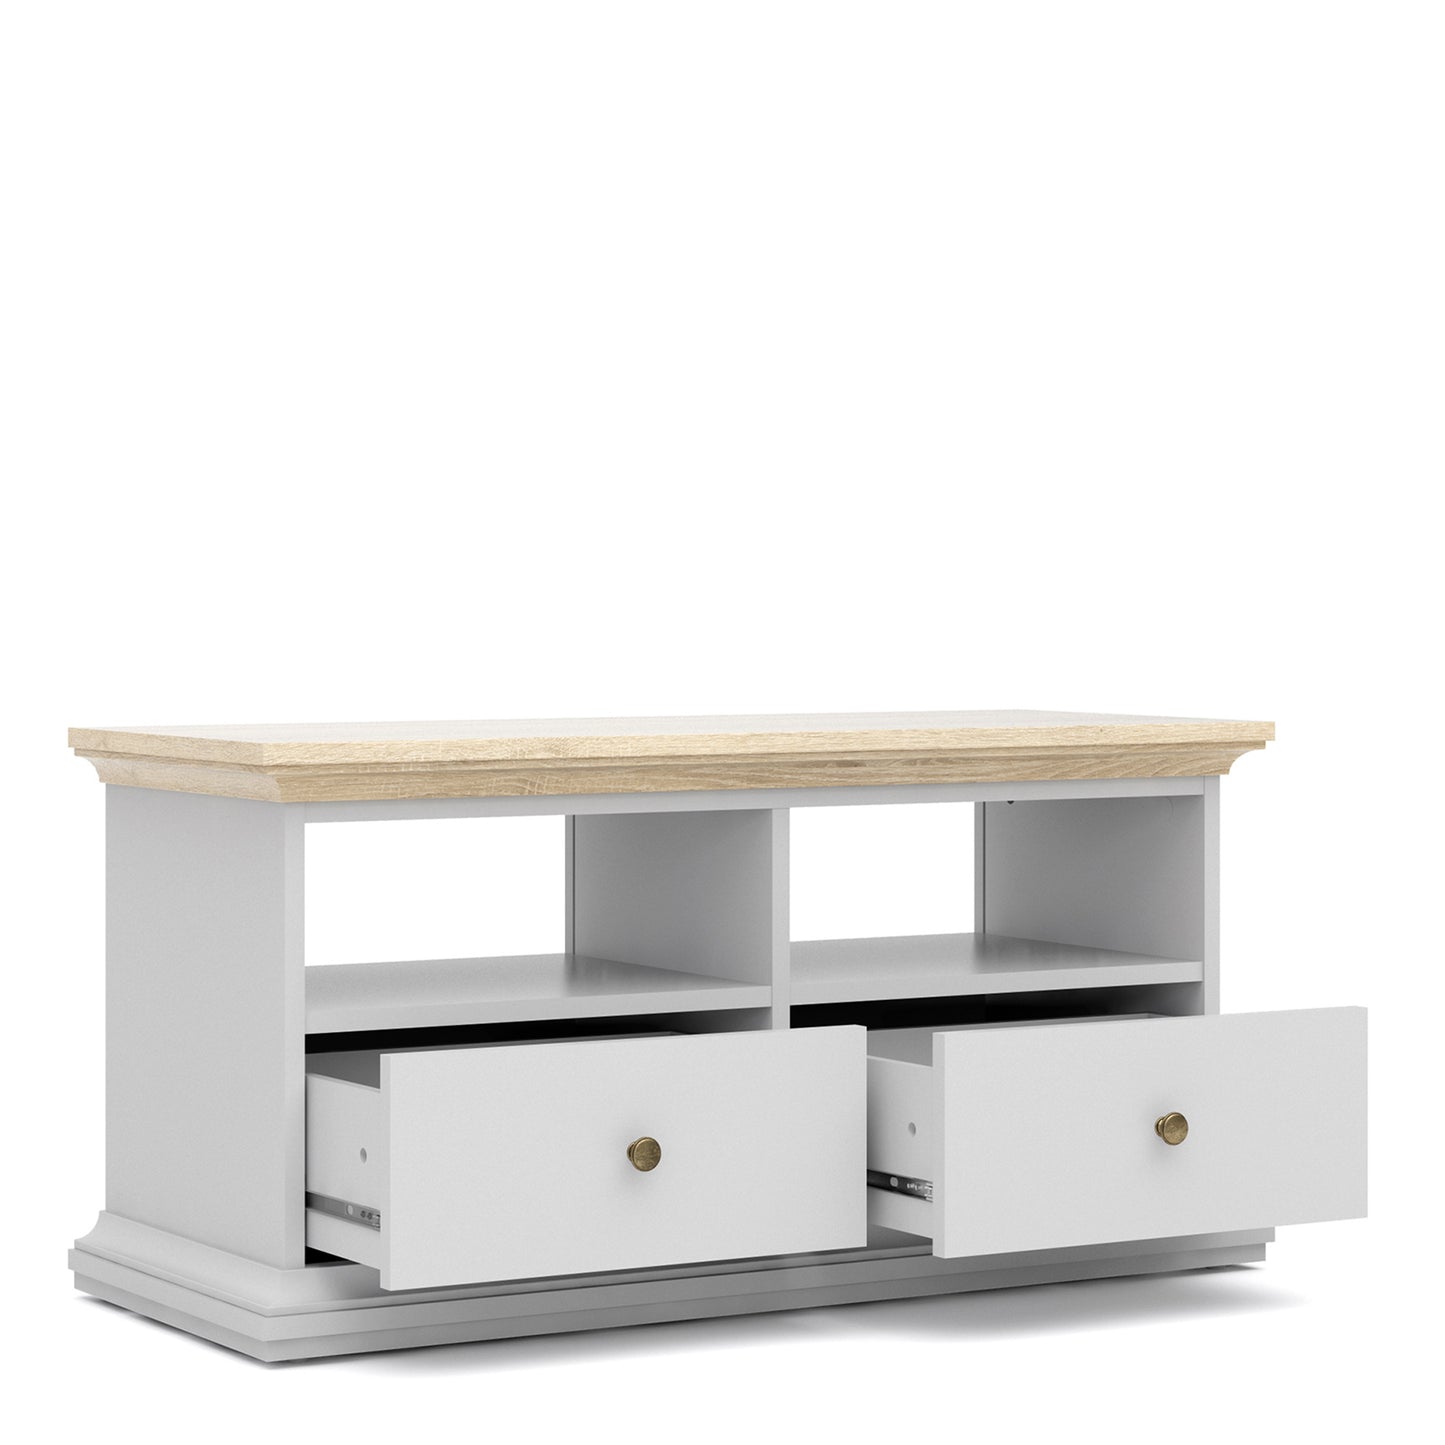 Paris  TV Unit - 2 Shelves 2 Drawers in White and Oak